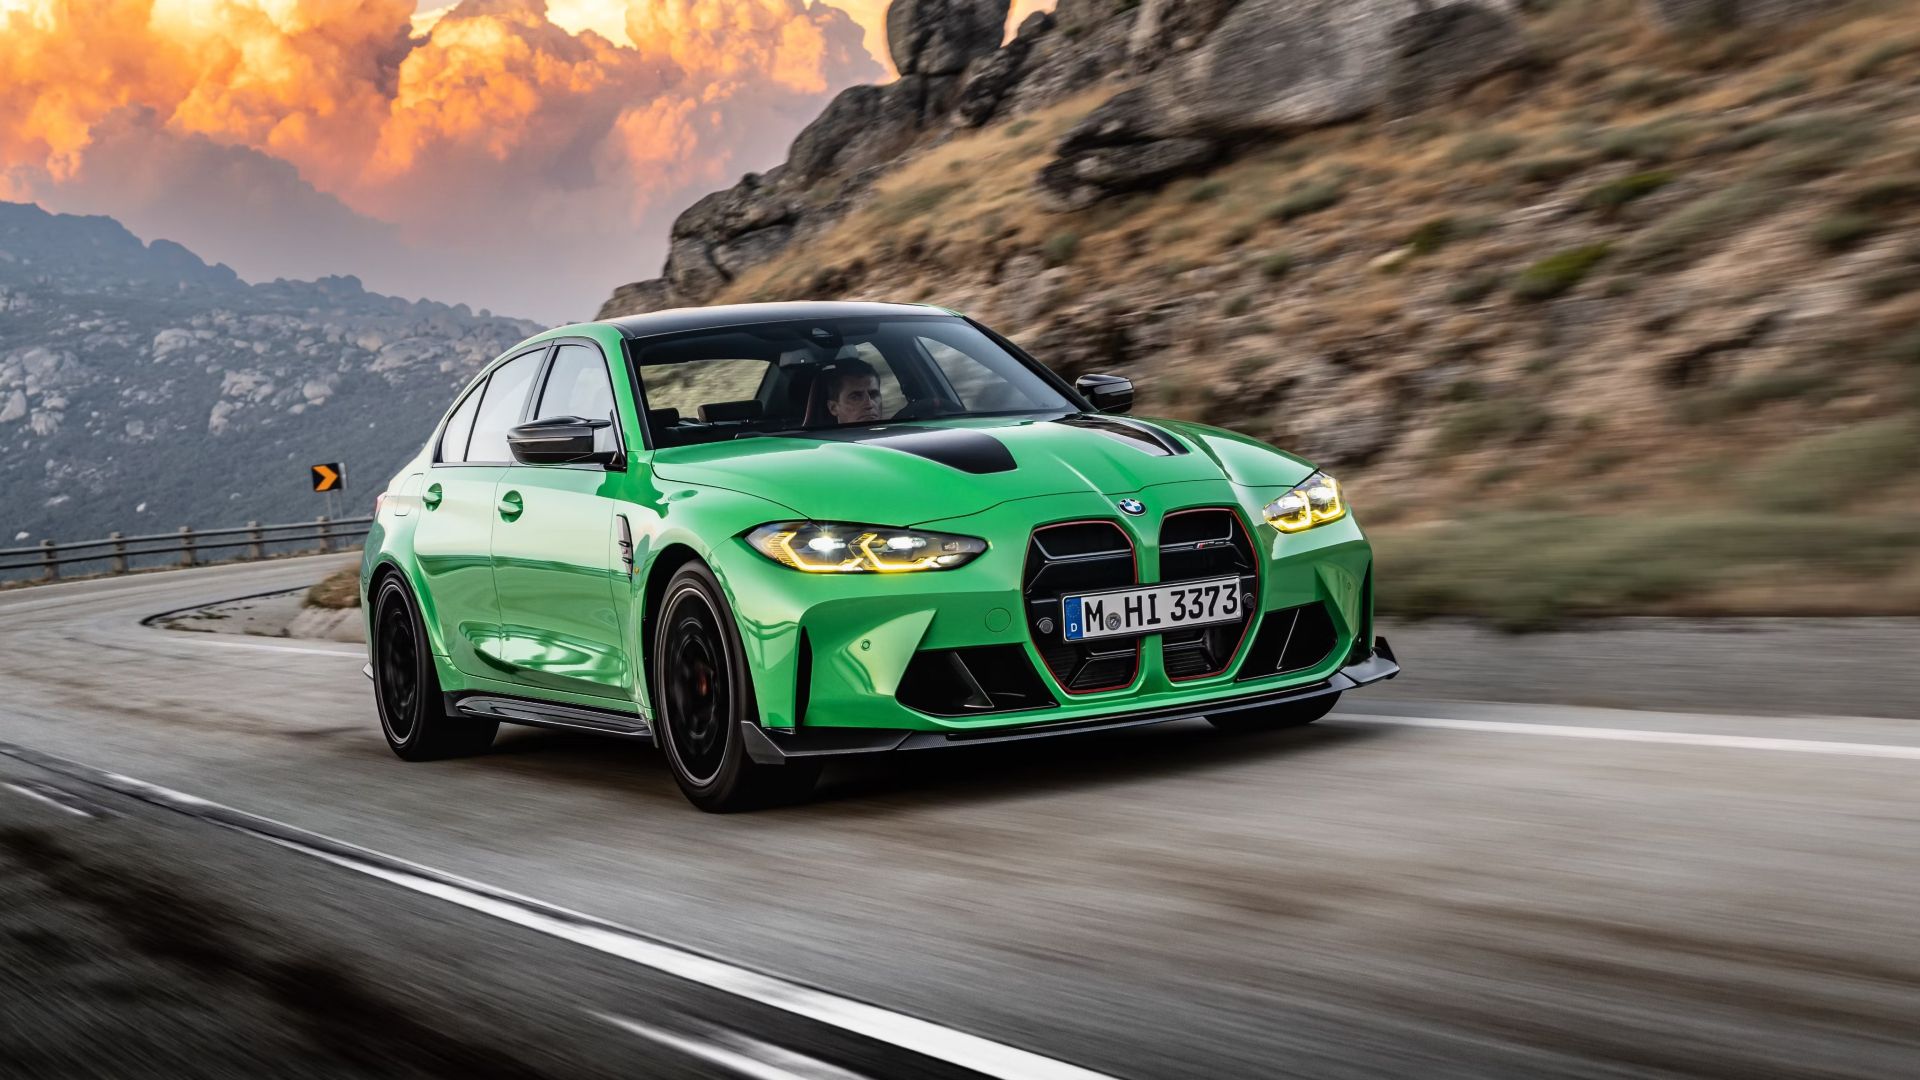 10 Fastest Sedans In The World, Ranked